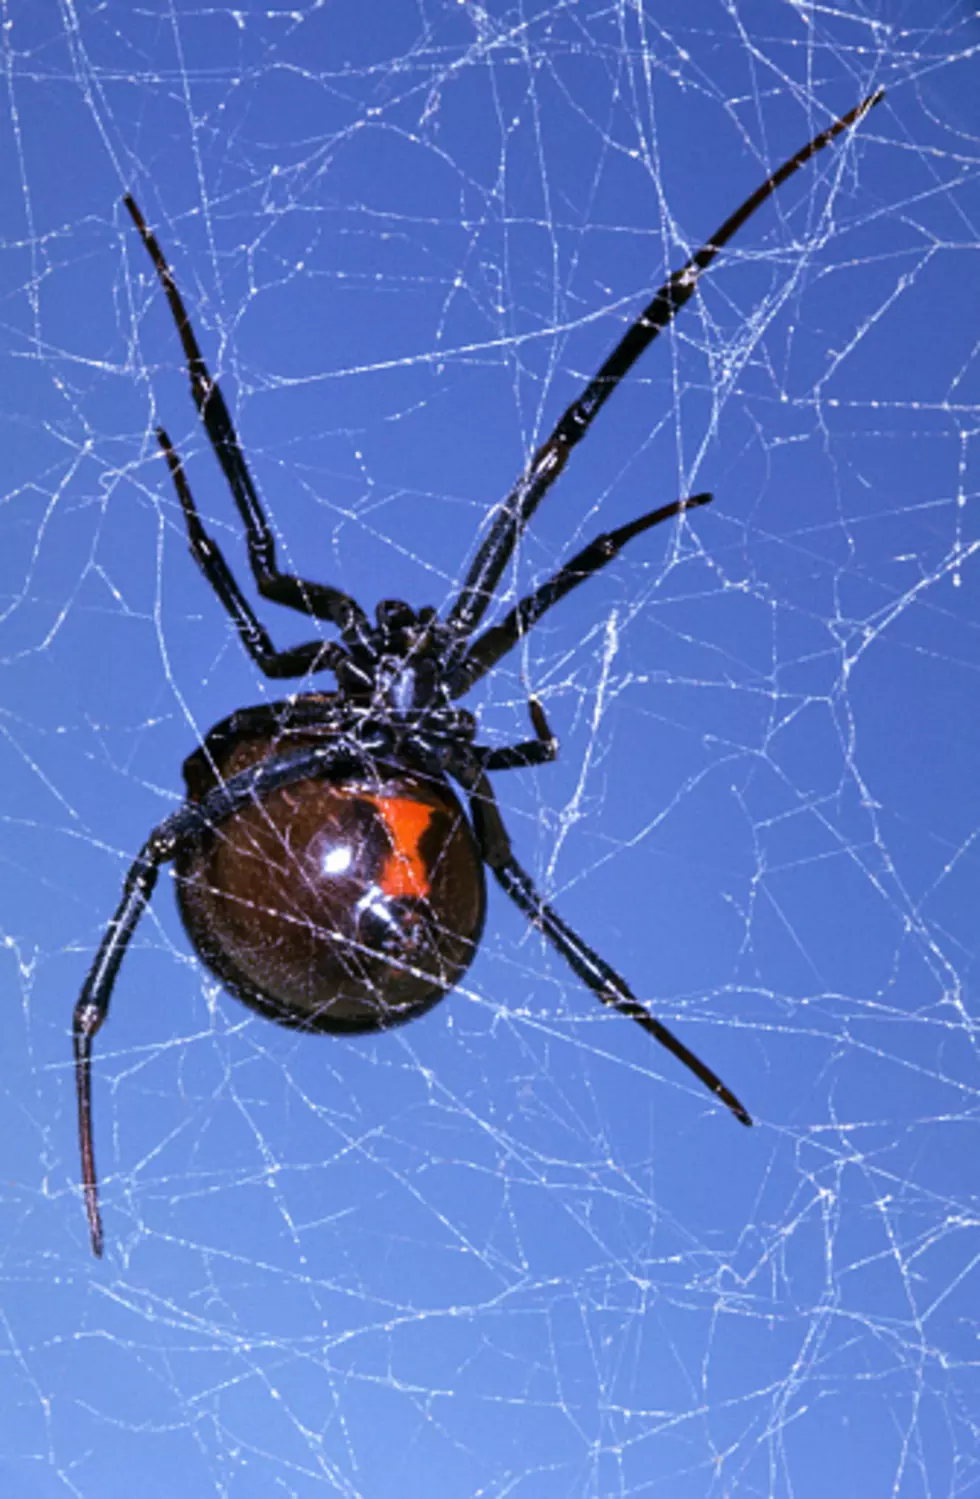 It’s Bug Season Again, So Let’s Look at Illinois’ Most Poisonous Creepy-Crawlies